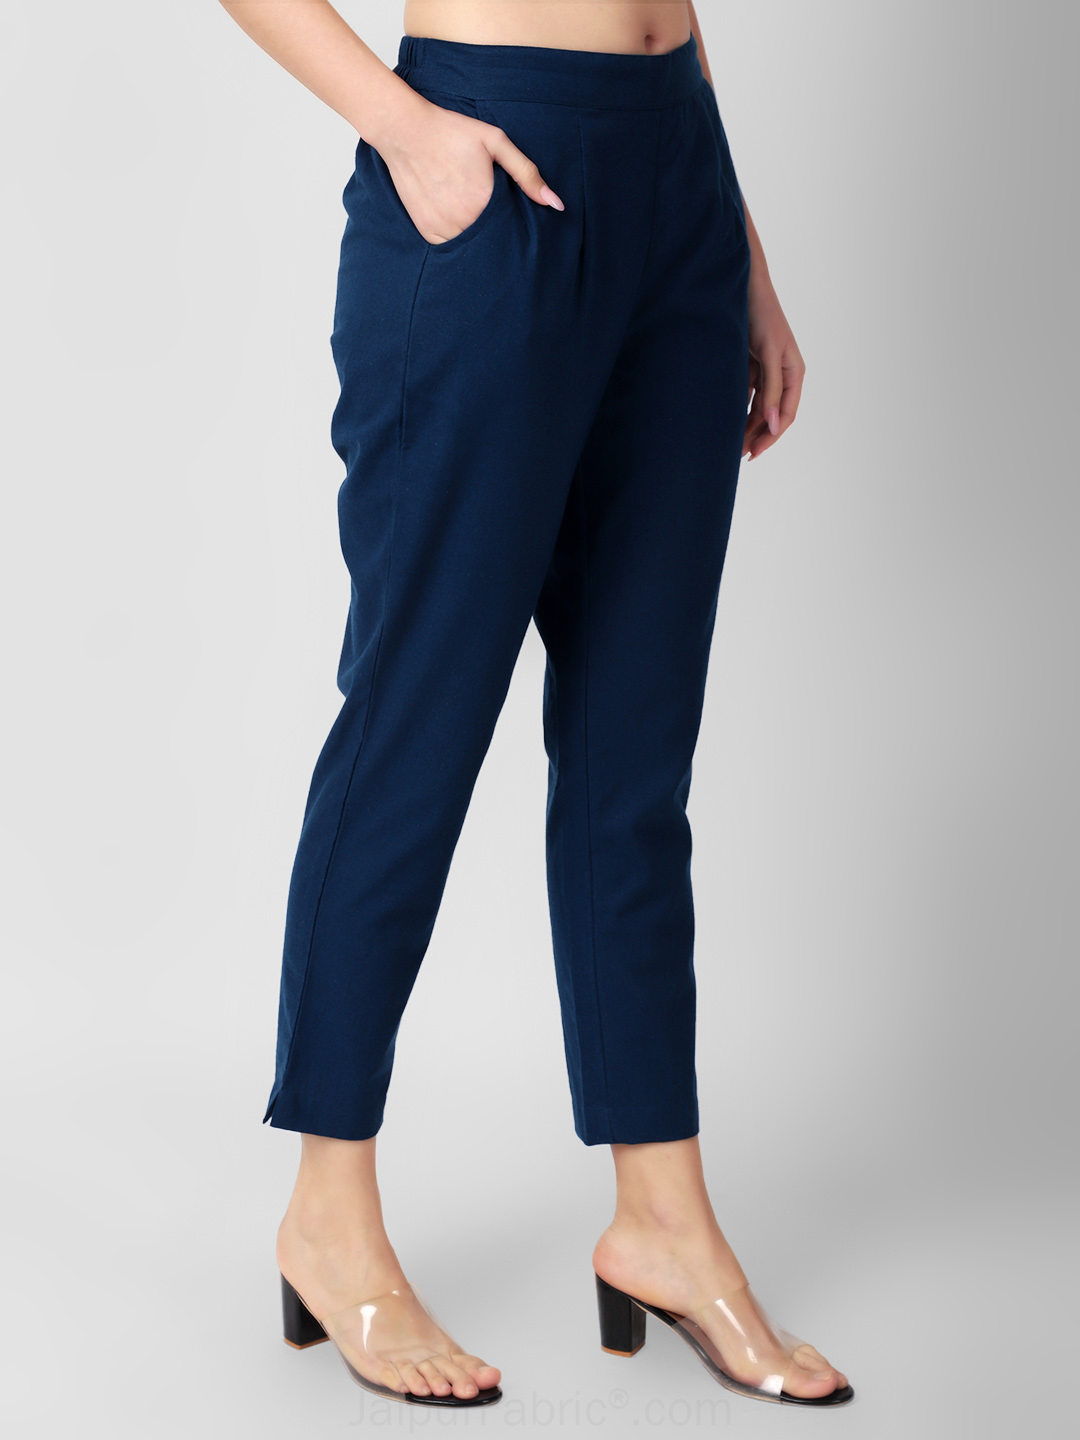 Indigo Hues Women Cotton Pants casual and semi formal daily trousers